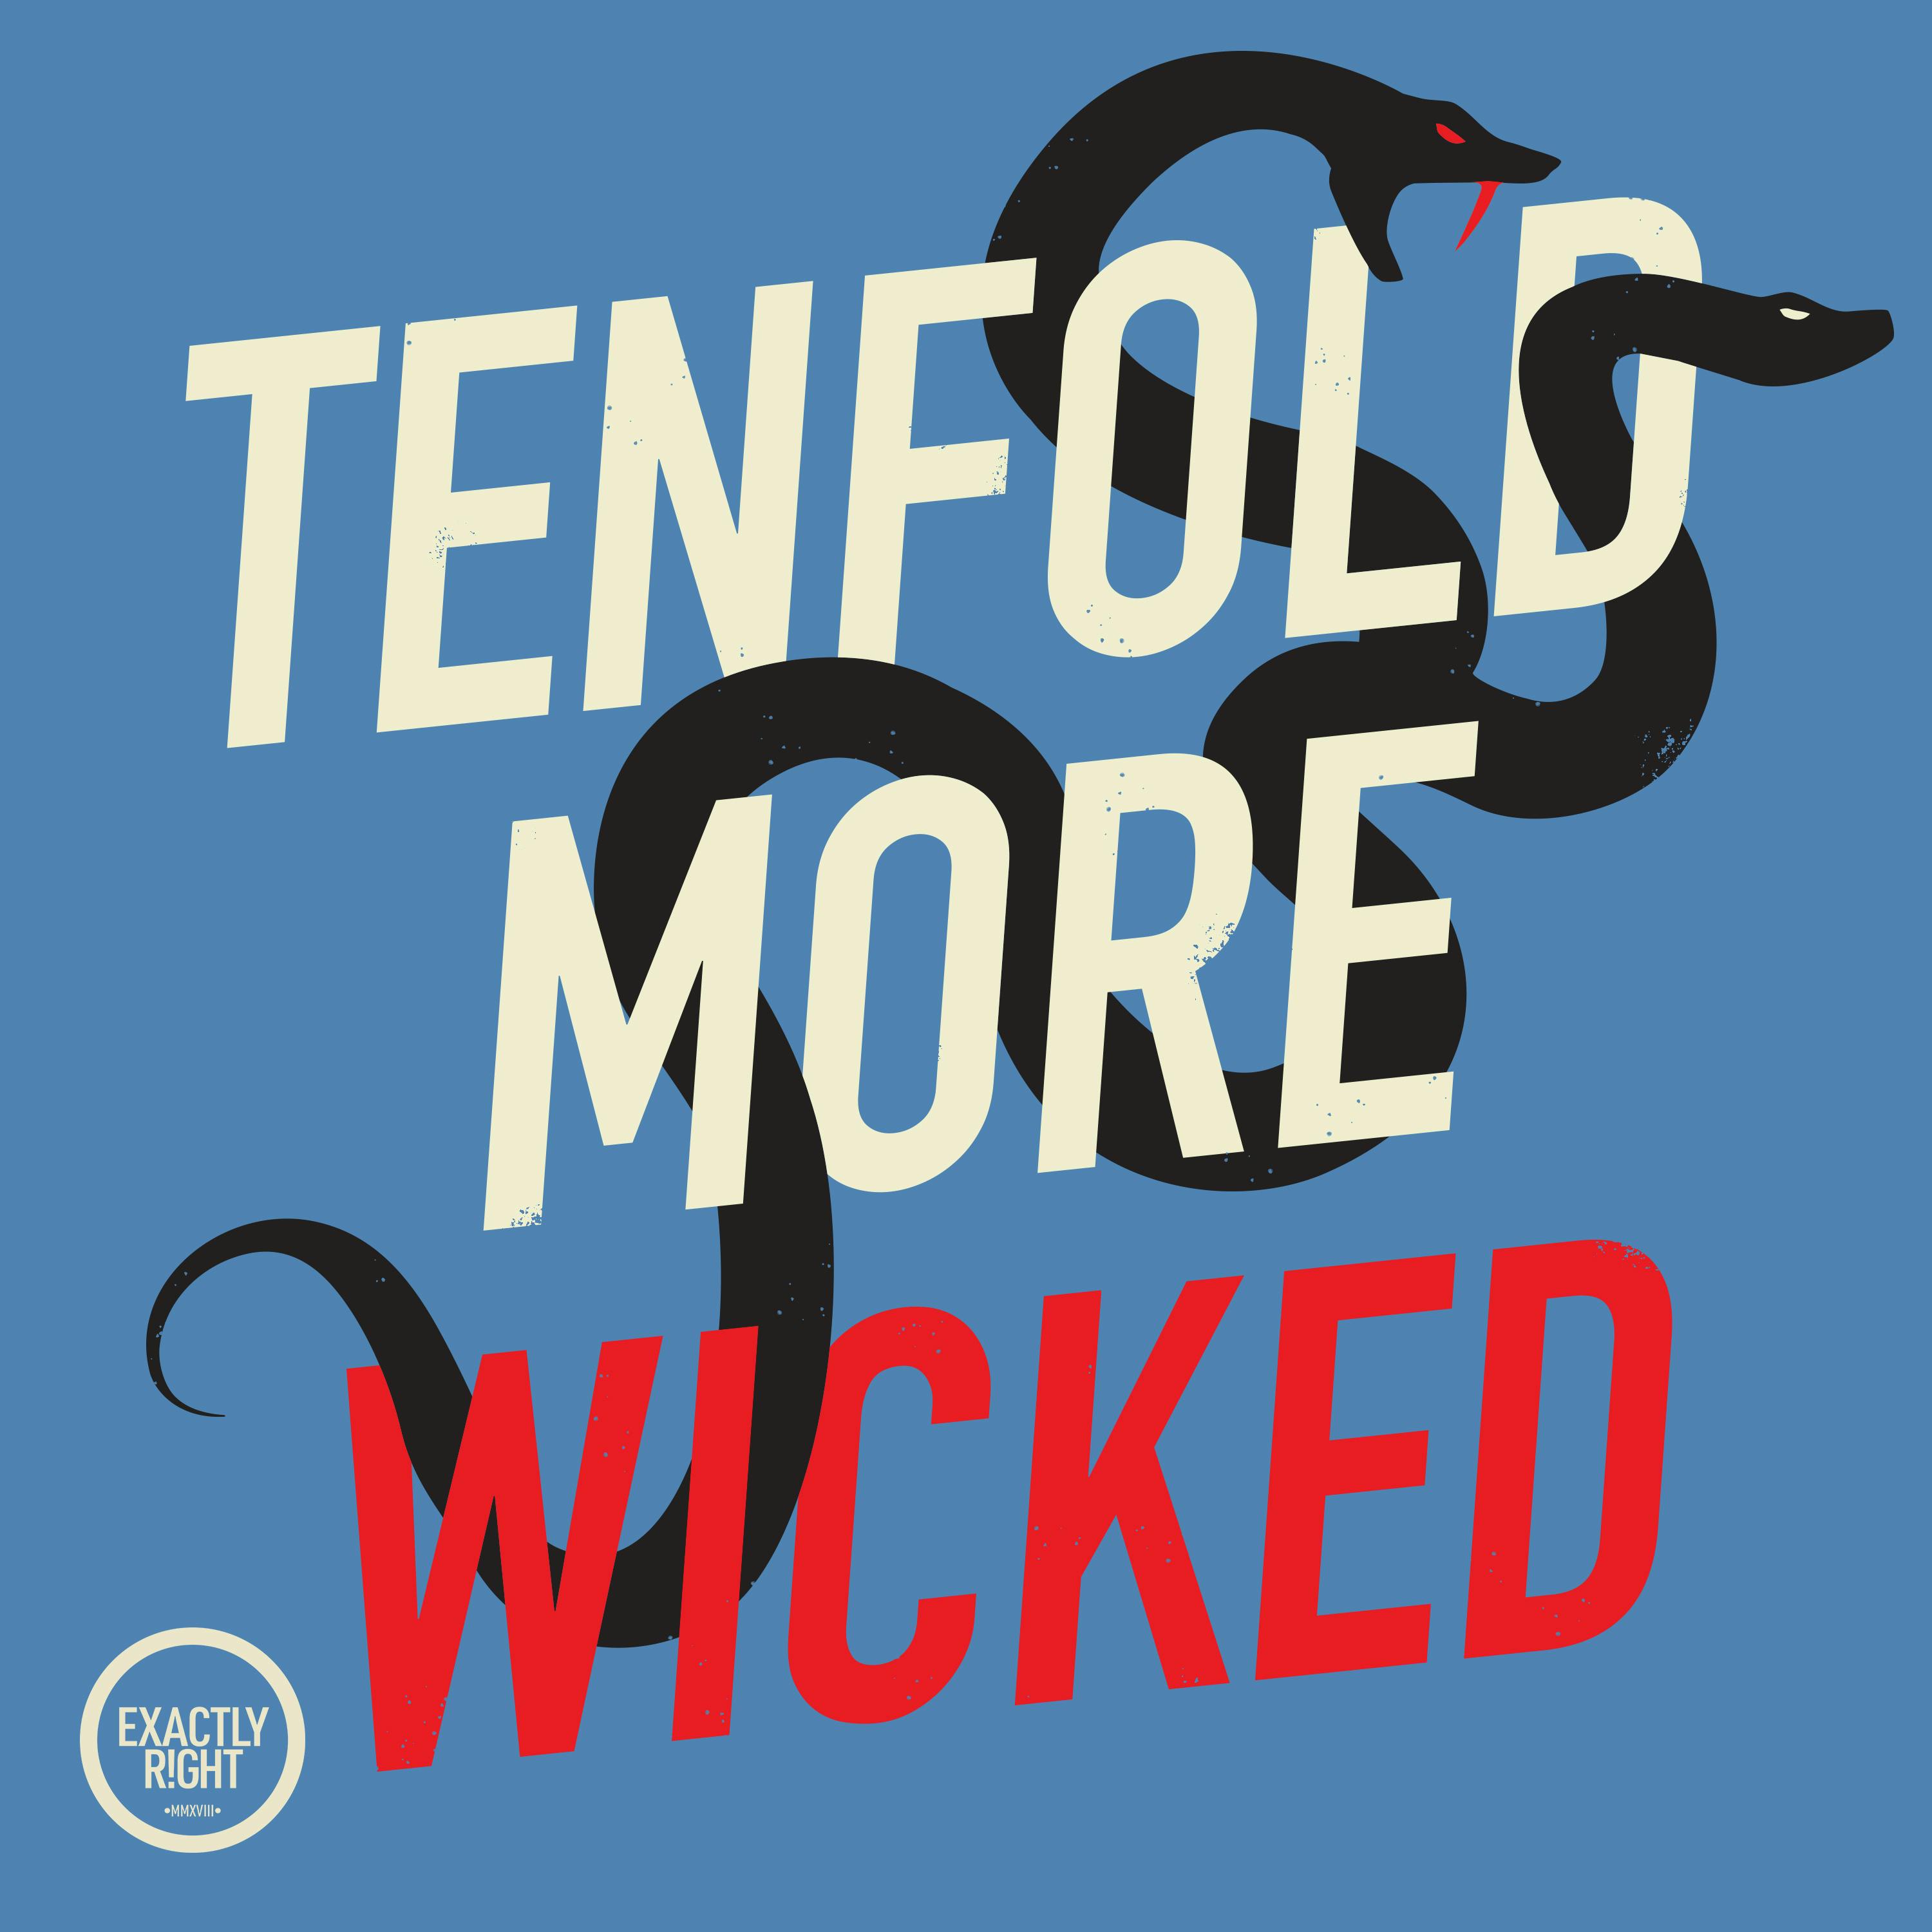 Tenfold More Wicked - A Blessing and a Curse: A Hellscape